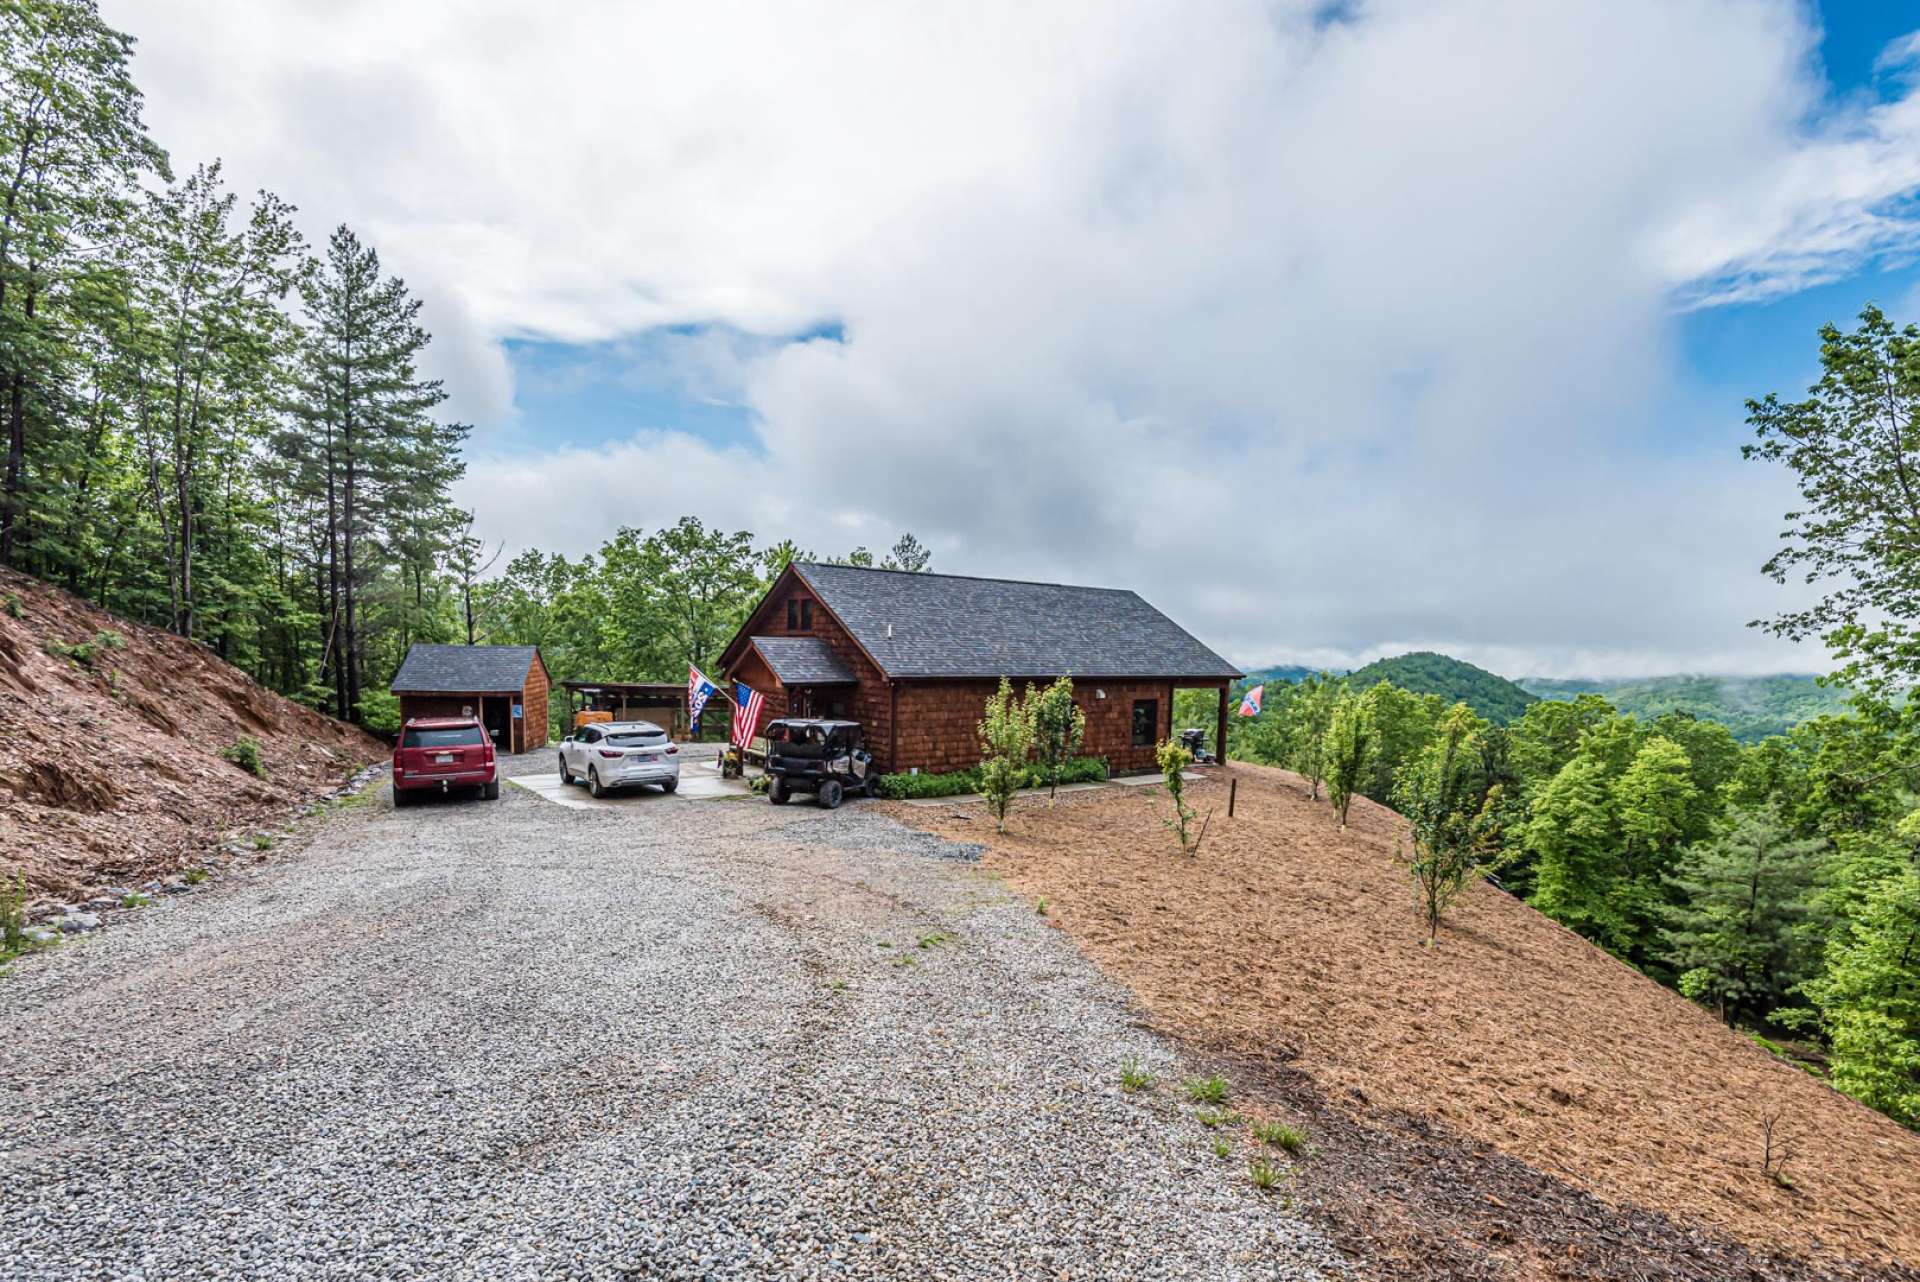 Offered at only $299,000, this custom cedar cabin nestled among a private 2 acre setting is an ideal choice for your NC Mountain retreat cabin.  *An additional 8 acres available for a total of 10 acres and cabin for $319,000.  Call today for additional details or private viewing for listing C145.